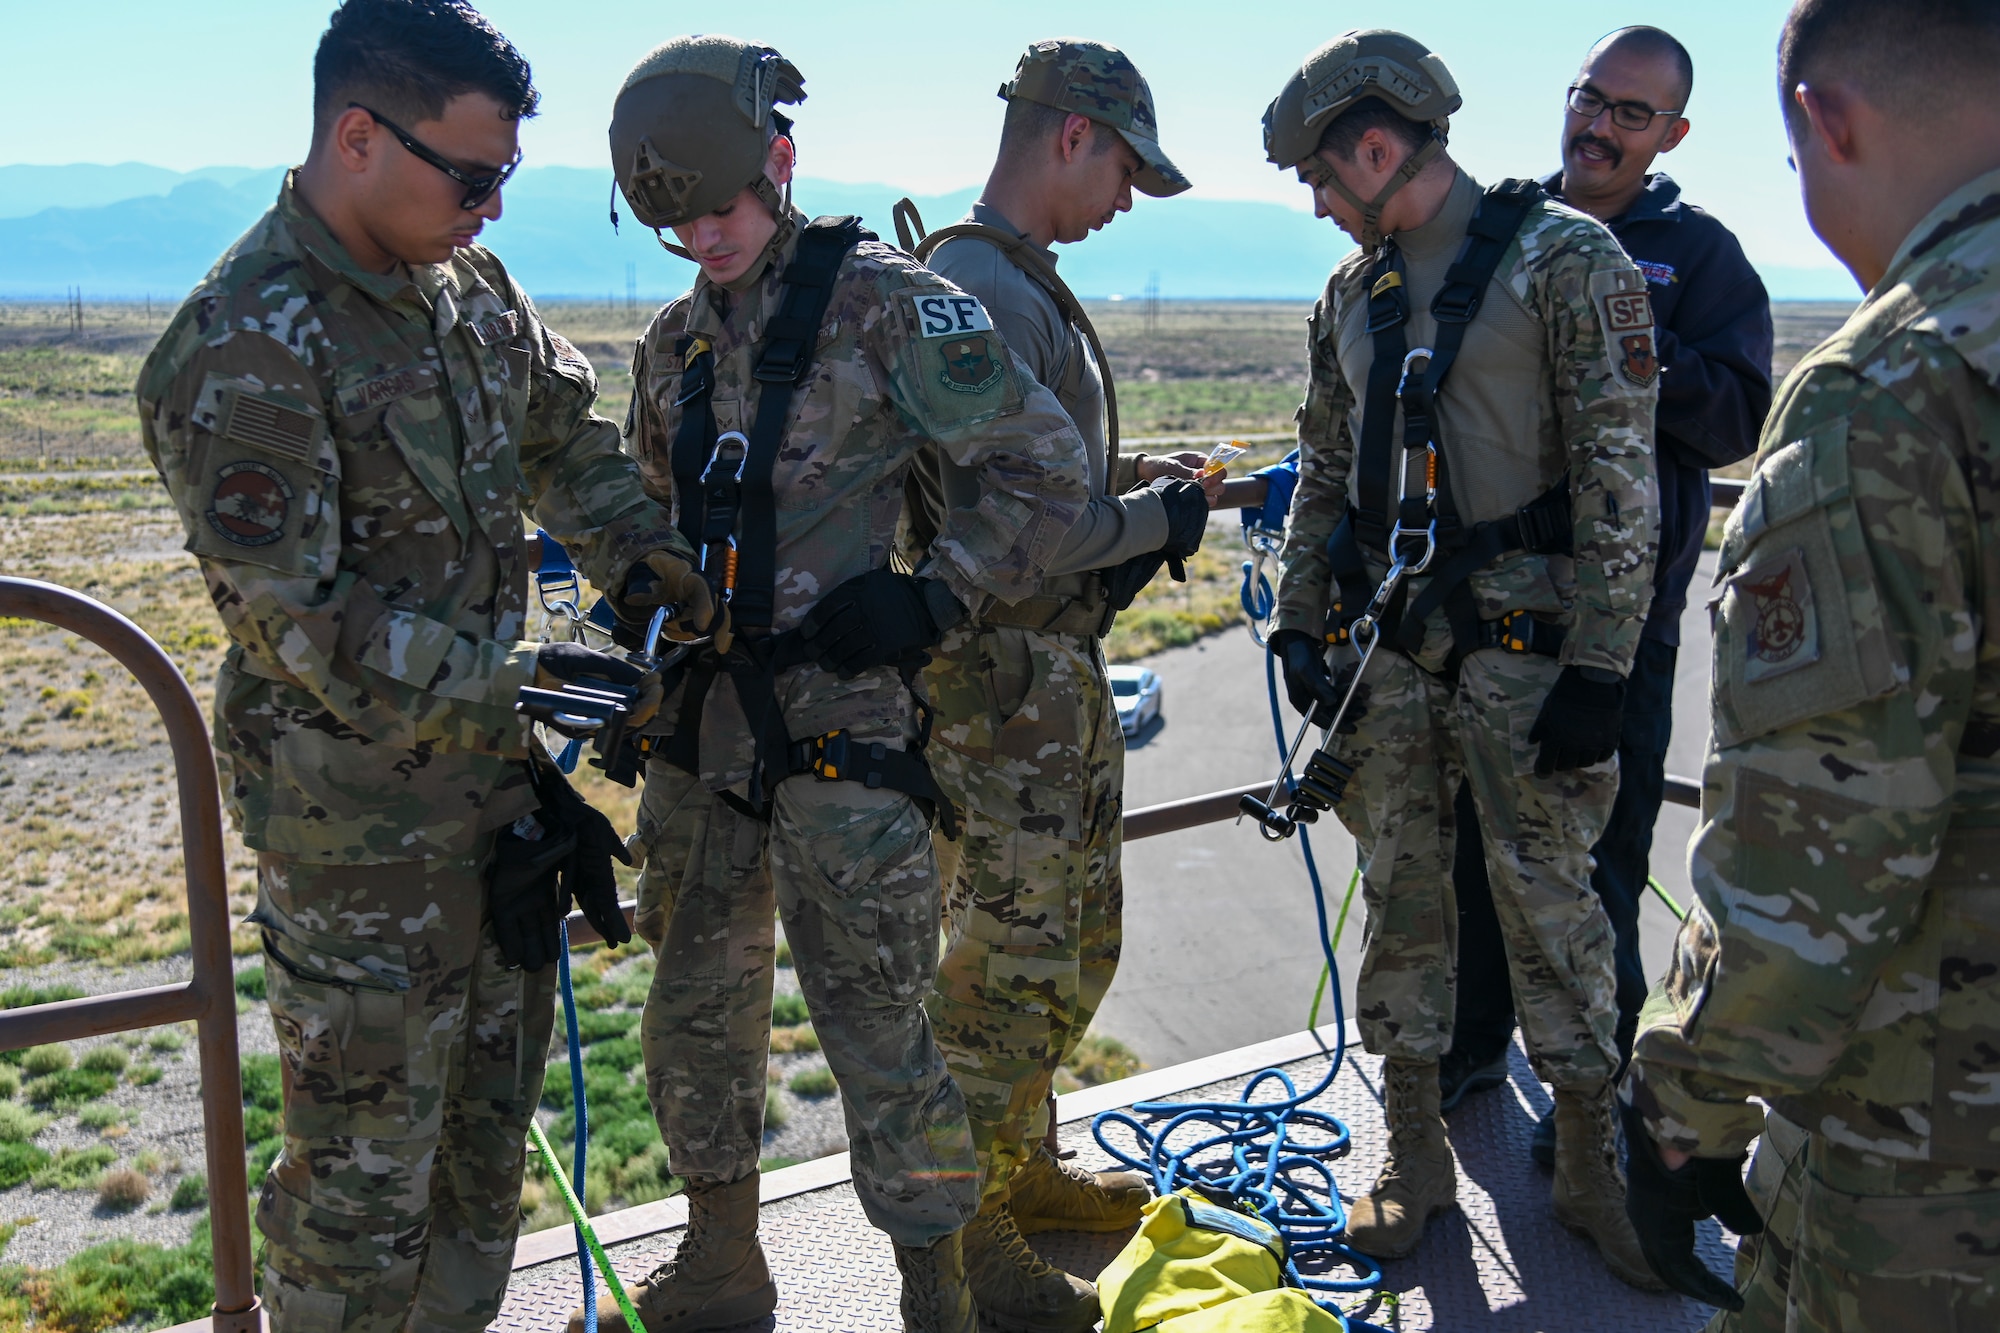 Members from the 49th Security Force Squadron and 49th Civil Engineer Squadron participated in the 49th Wing’s first rappel skills training, Oct, 5, 2021, on Holloman Air Force Base, New Mexico. The training lasted two days, with one full day for learning anchors, knots, purpose, how to maintain the ropes and becoming familiarized with the equipment for rapid entry from buildings during hostile or dangerous situations. (U.S. Air Force photo by Airman 1st Class Jessica Sanchez-Chen)